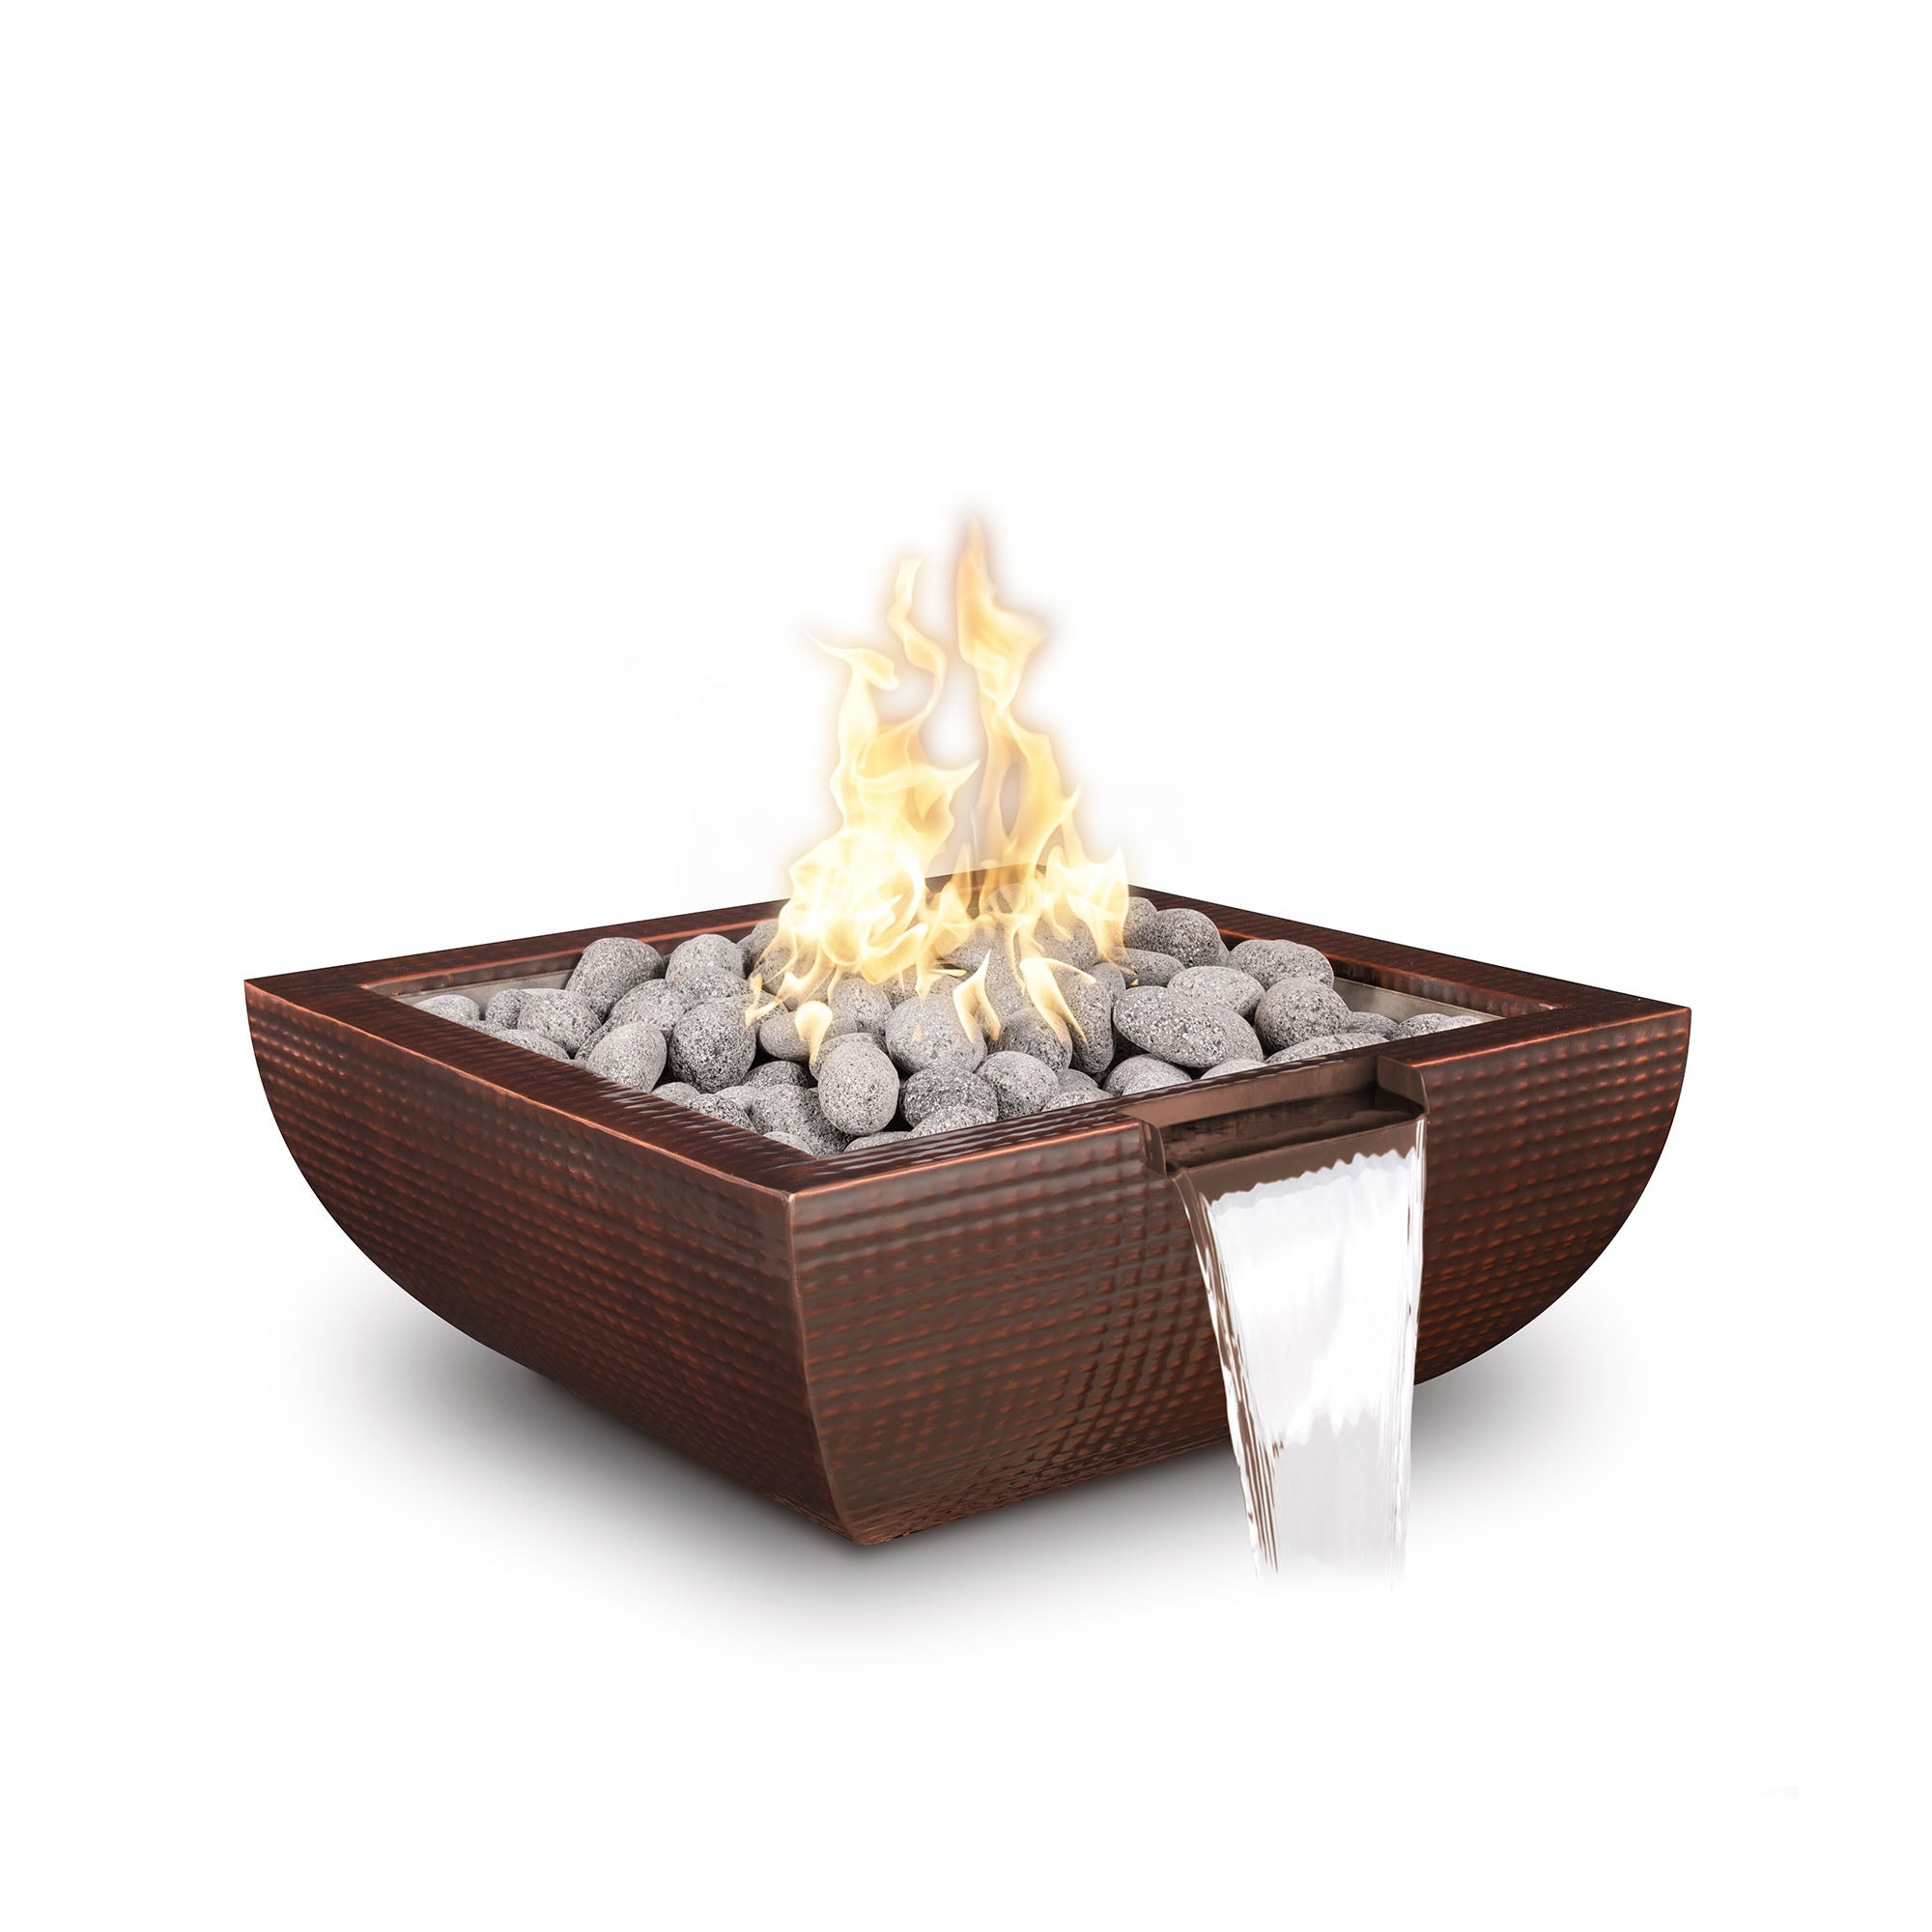 Avalon Hammered Hammered Copper Fire & Water Bowl - Kozy Korner Fire Pits